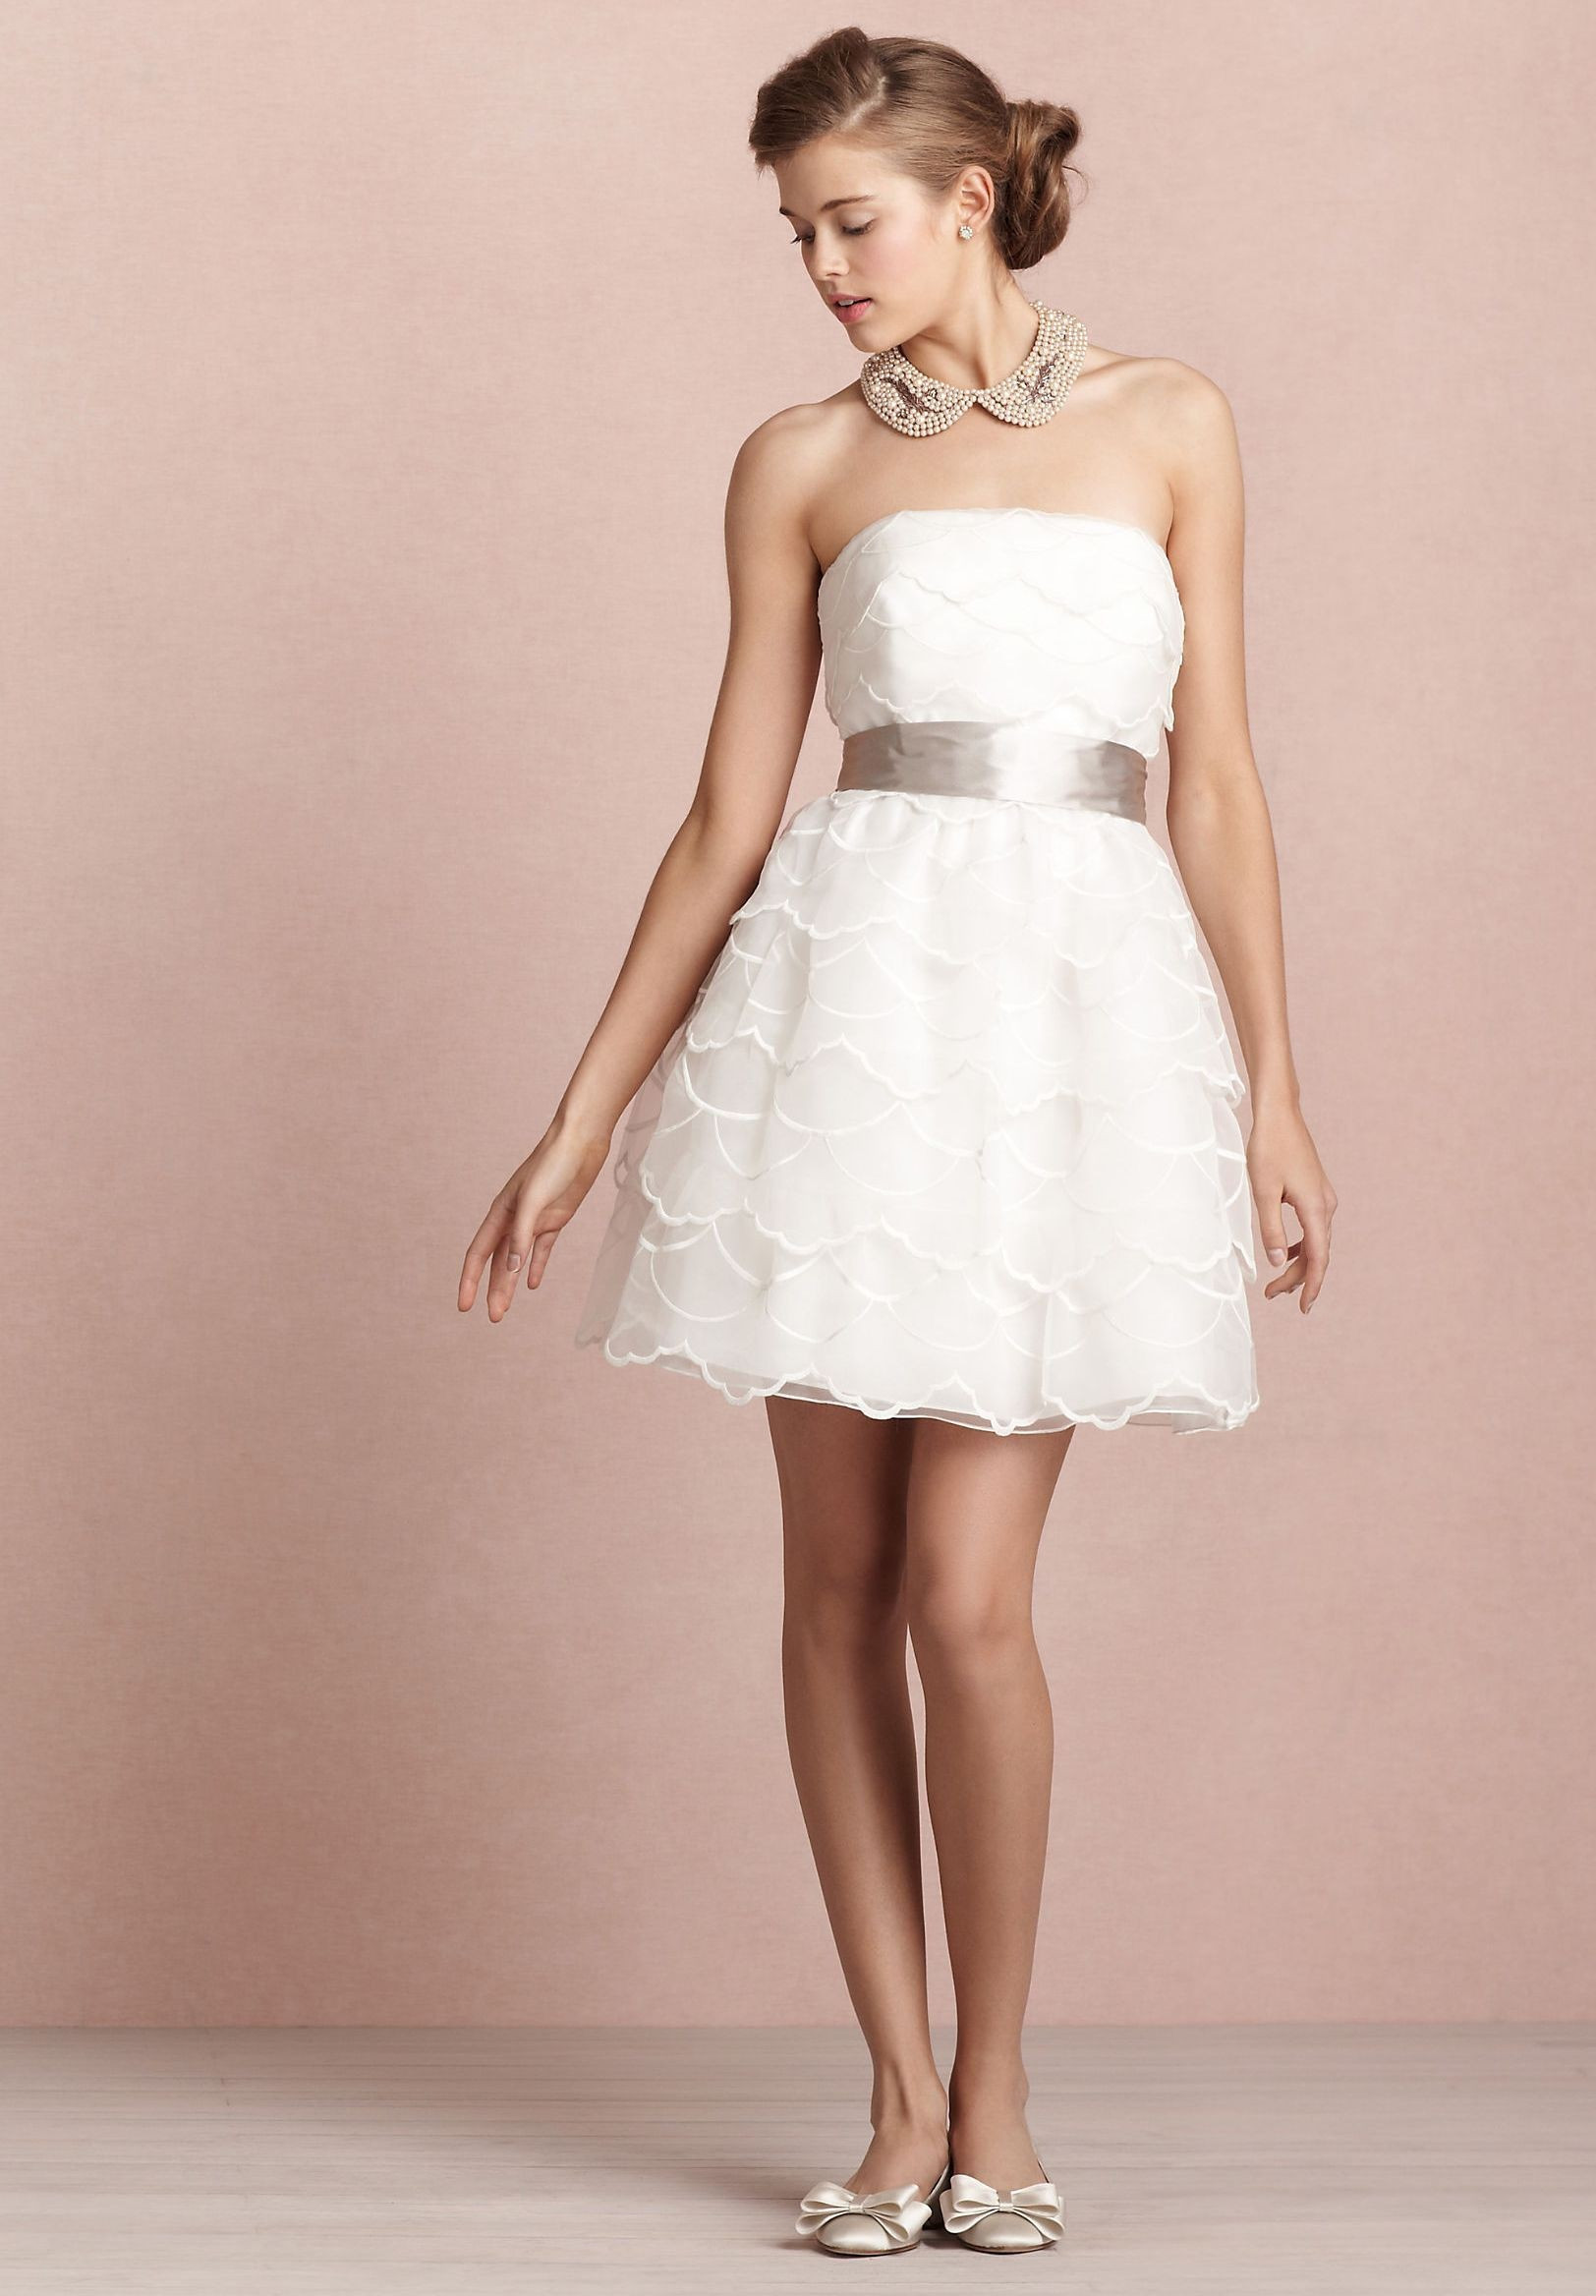 Wedding Reception Dresses
 30 GORGEOUS RECEPTION DRESS FOR THE BRIDE TO BE